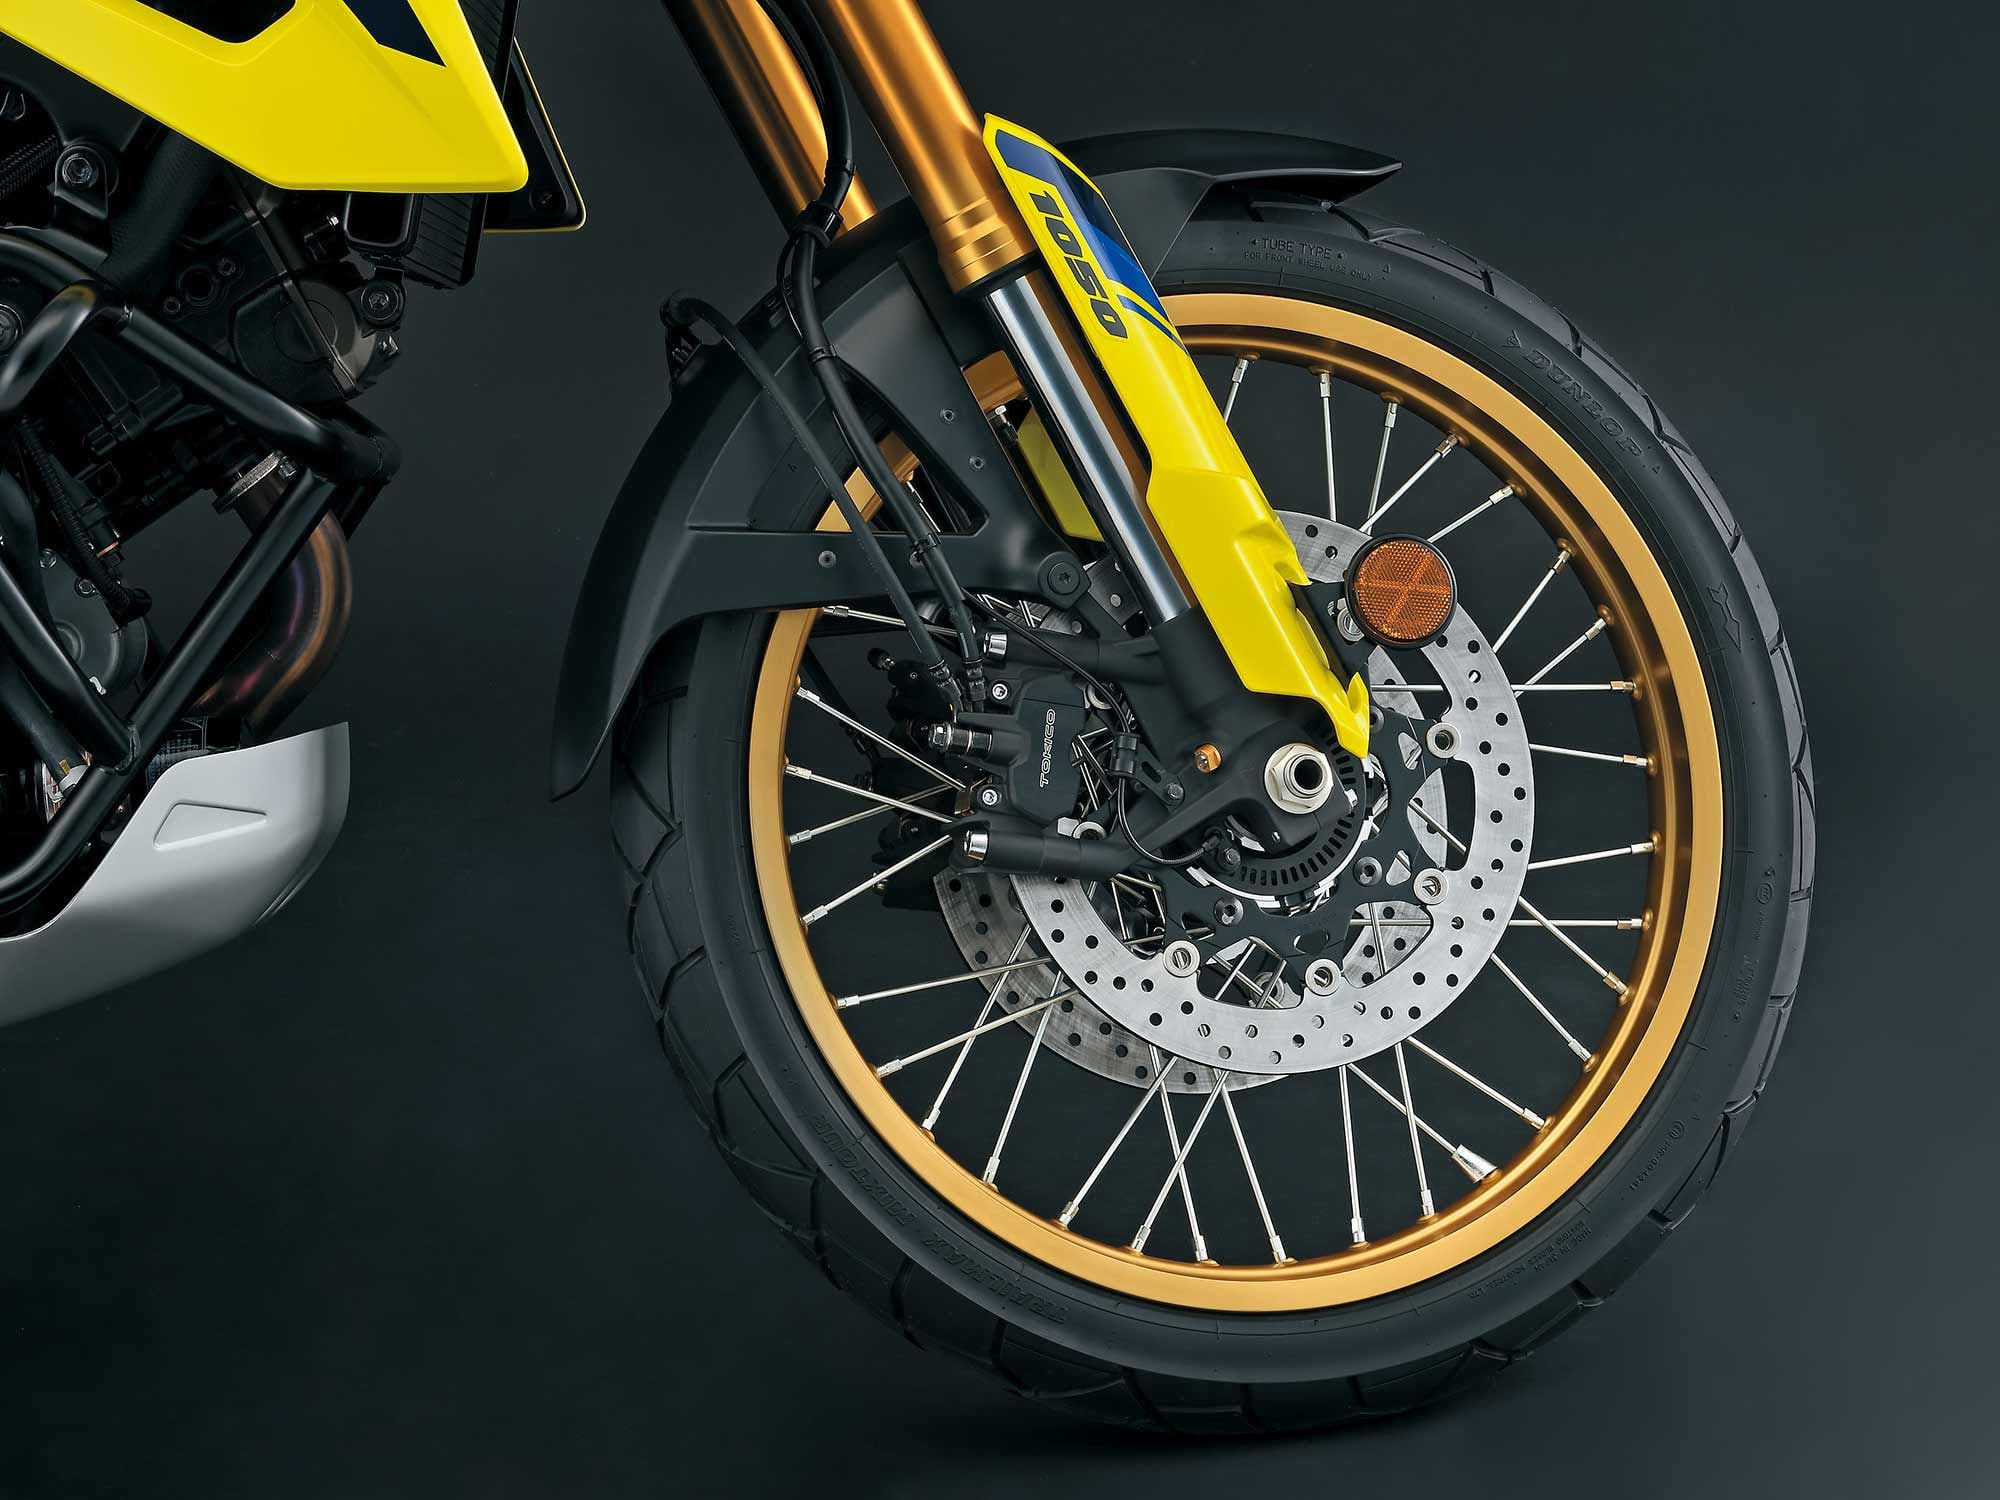 A larger 21-inch front wheel and improved fender assembly are highlights out front.